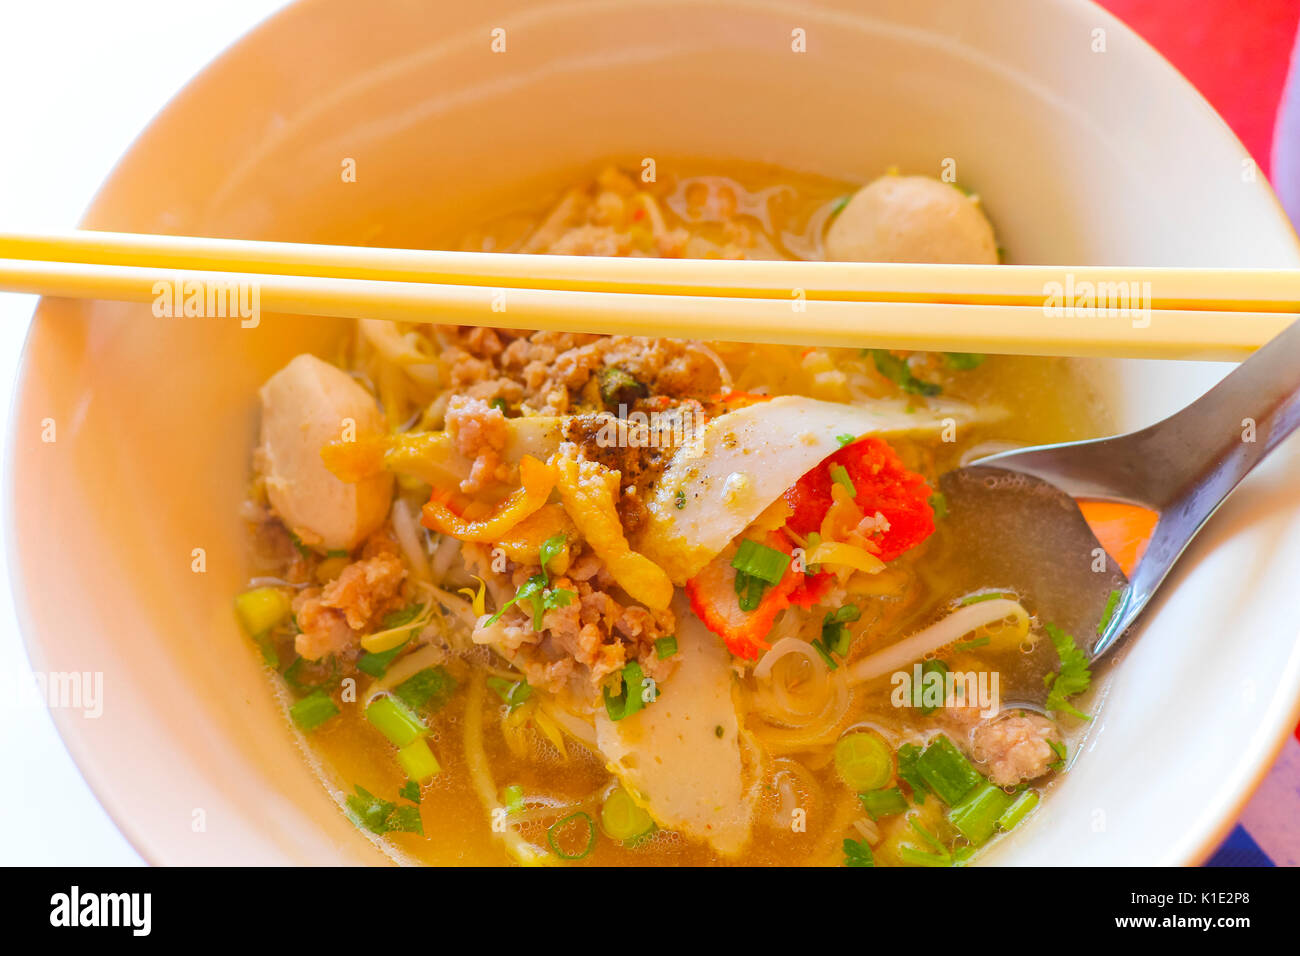 bowl of noodles,thai Chinese food style,select focus Stock Photo